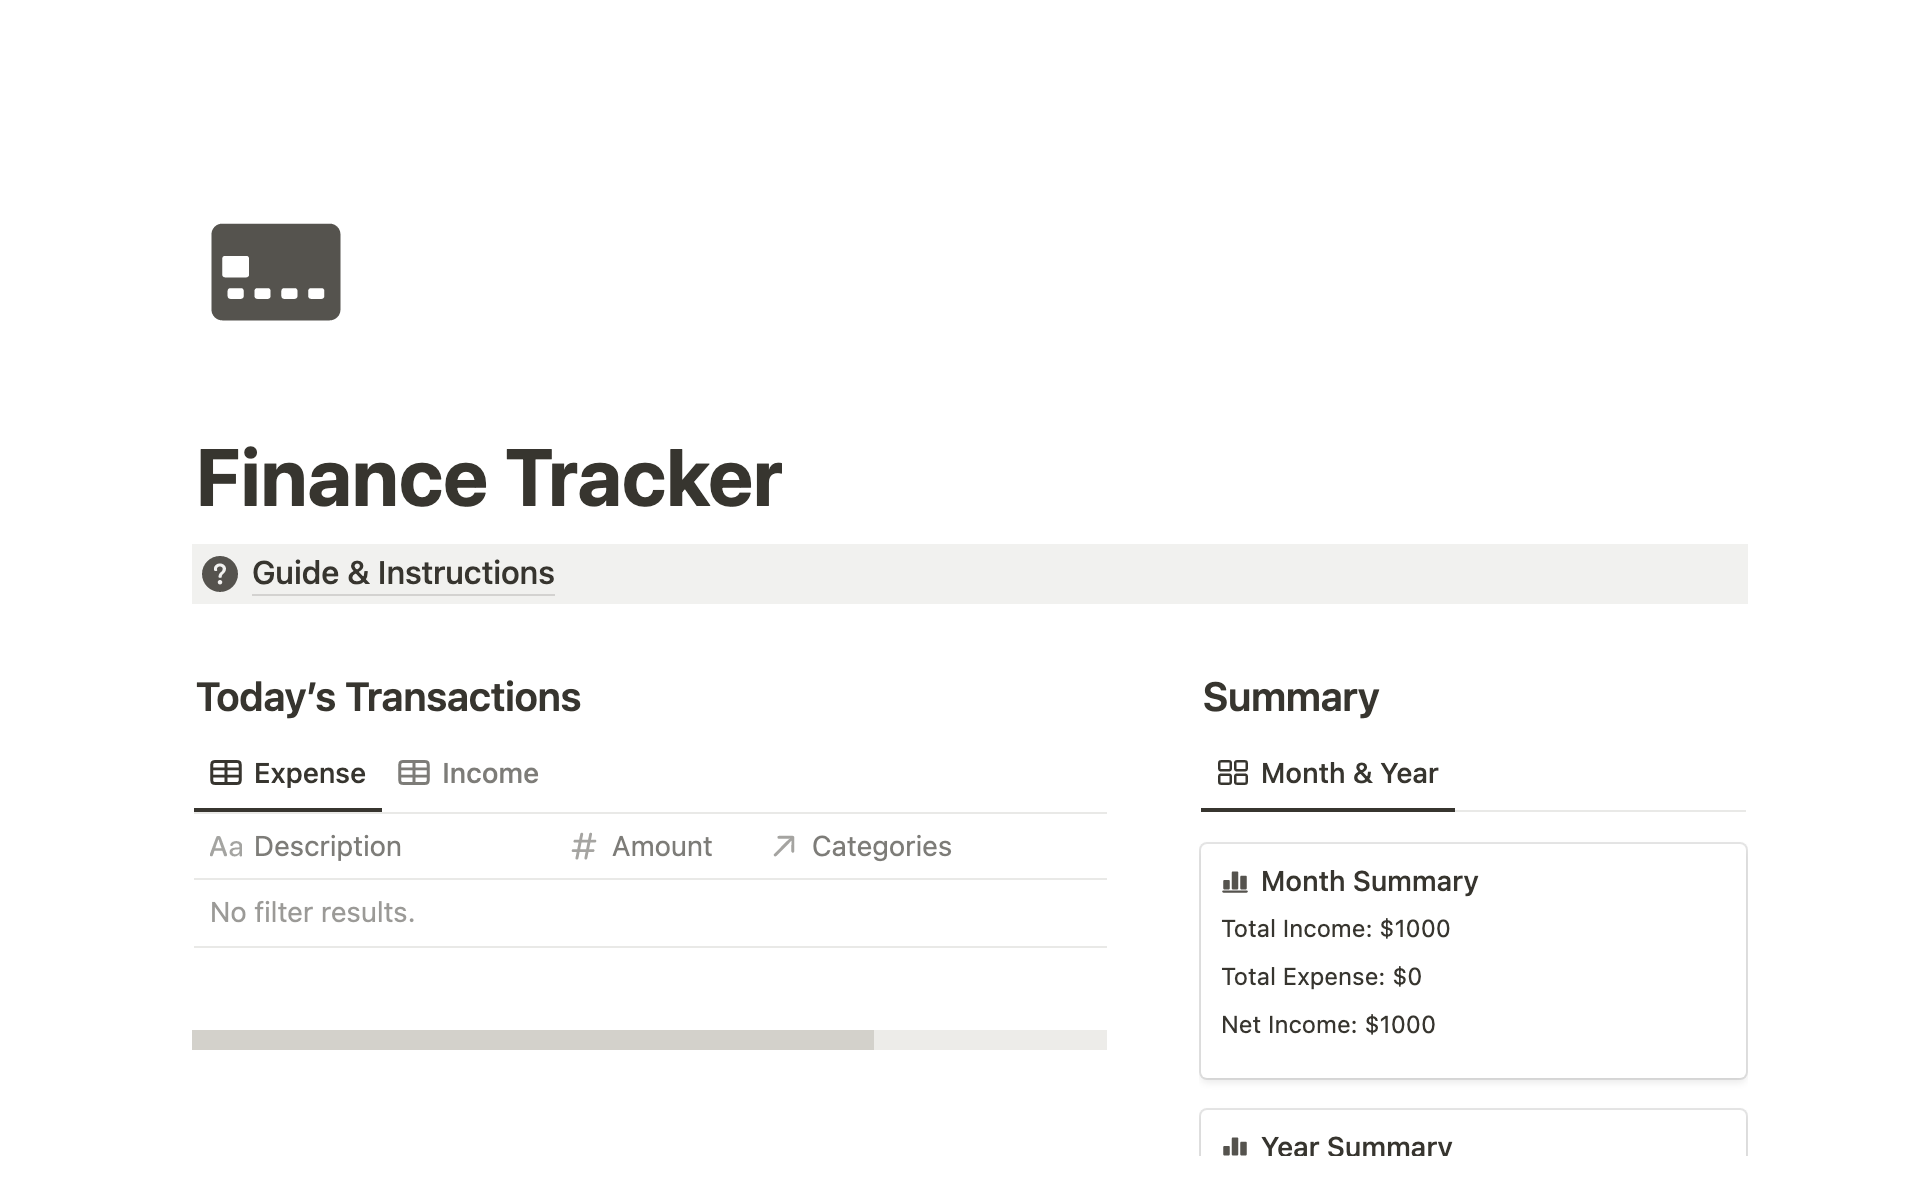 Track your income and expenses easily with this intuitive and user-friendly Finance tracker.